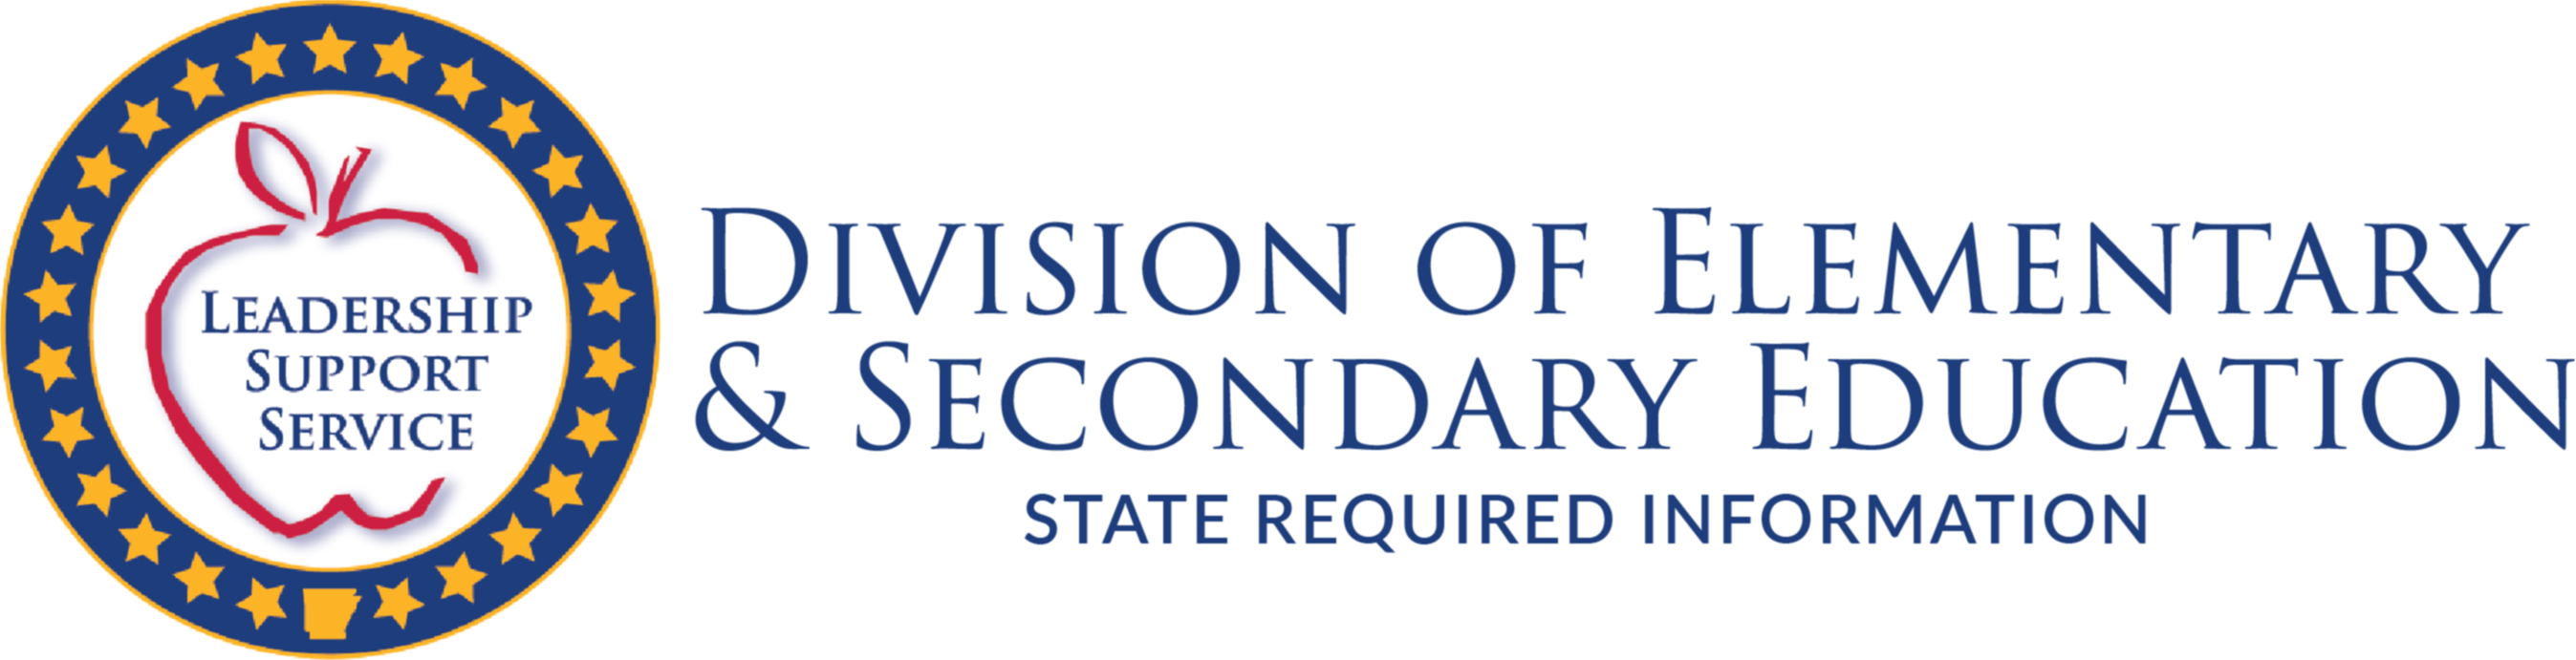 division of elementary and secondary education